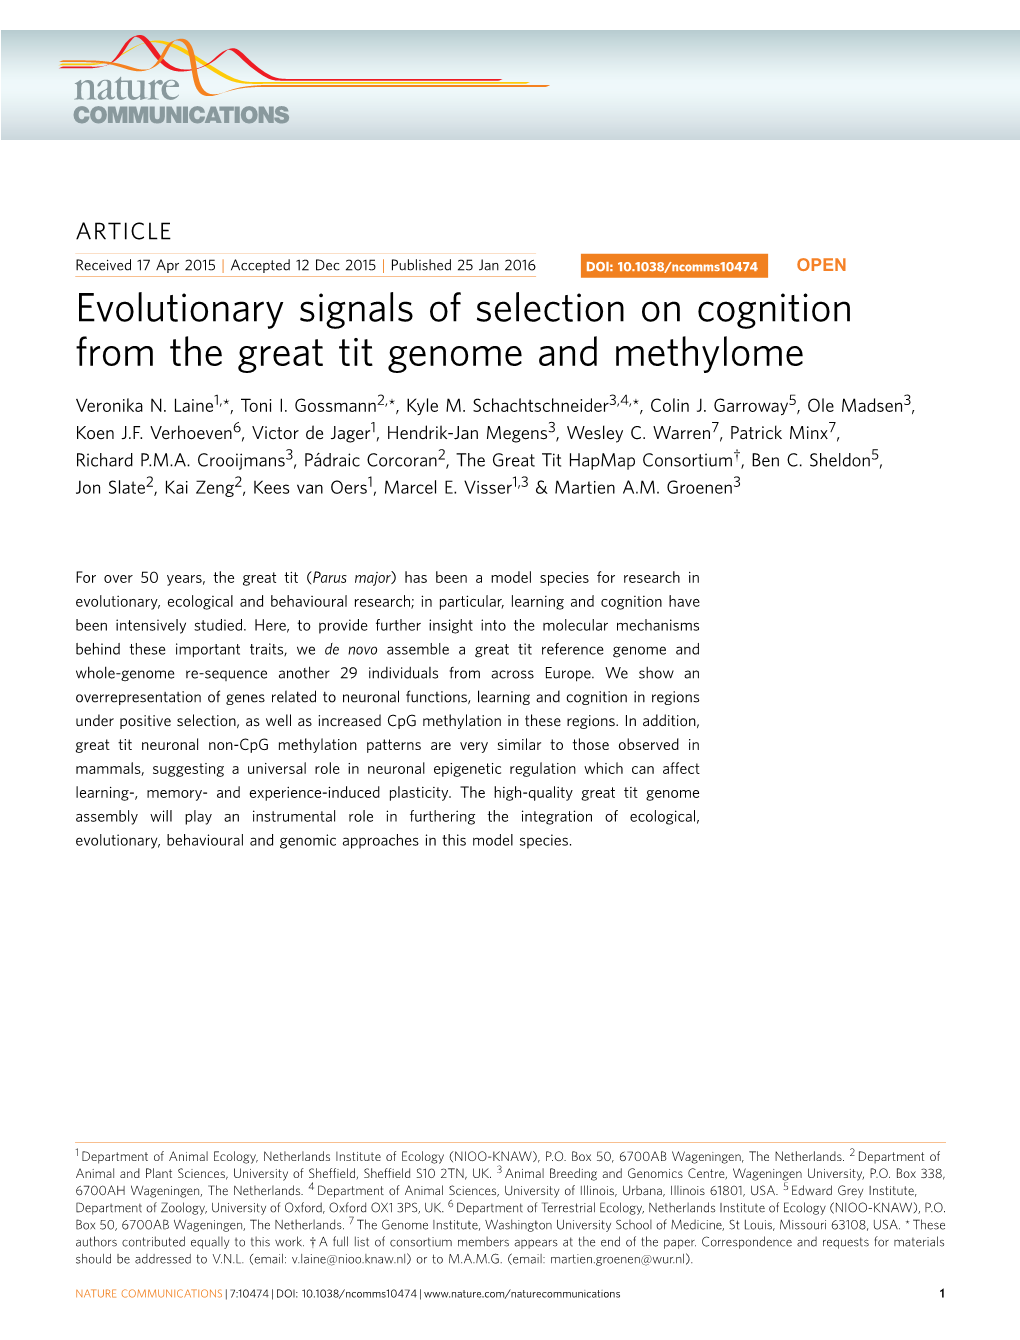 Evolutionary Signals of Selection on Cognition from the Great Tit Genome and Methylome